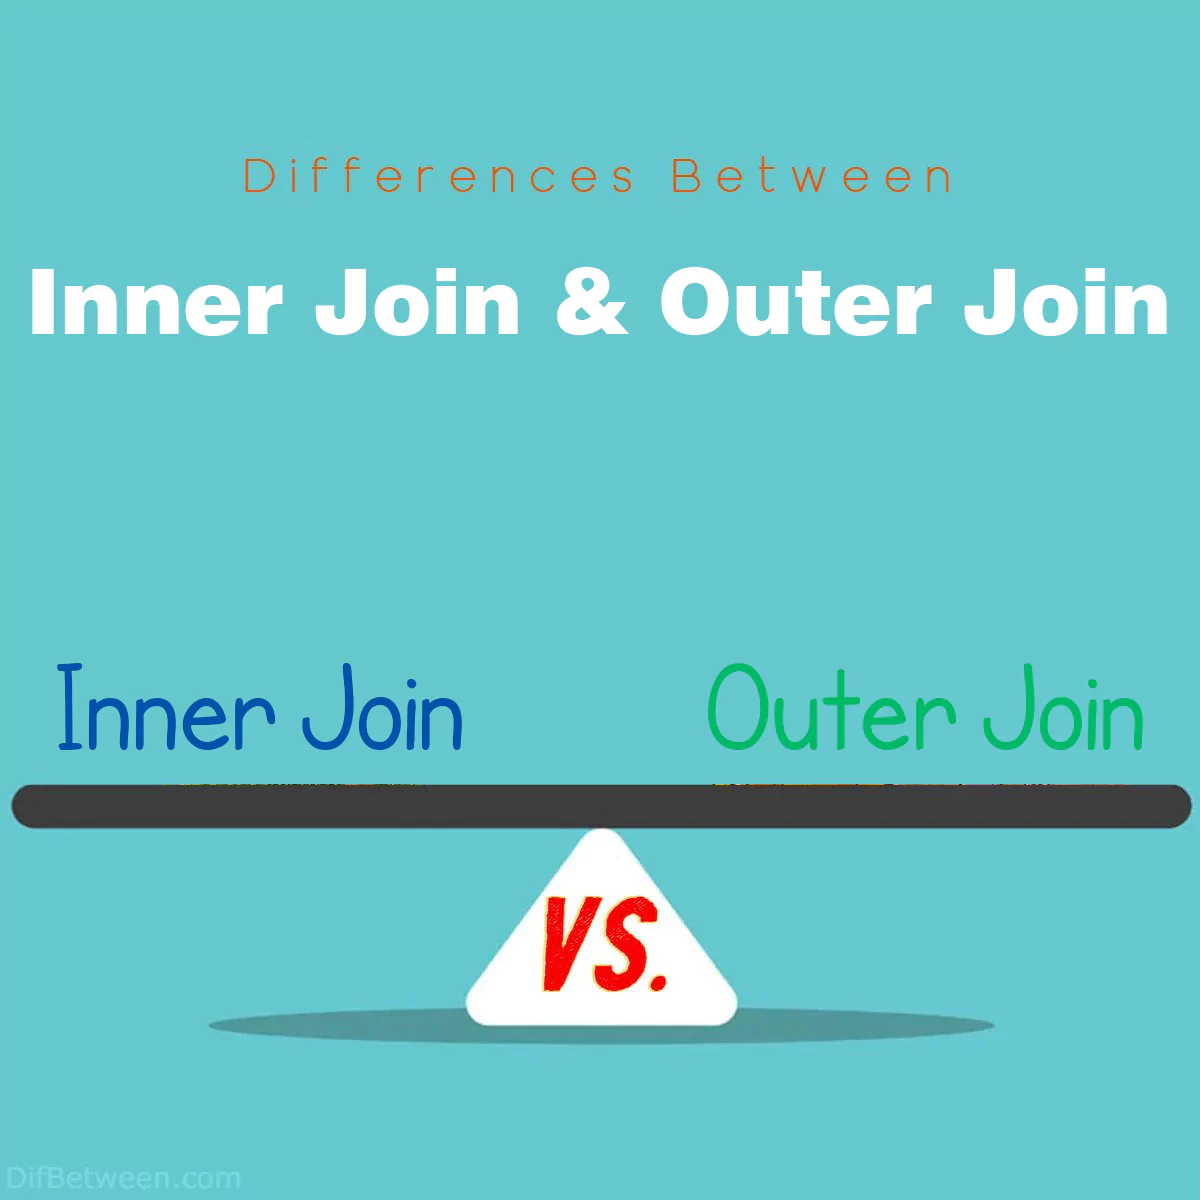 Differences Between Inner Join and Outer Join